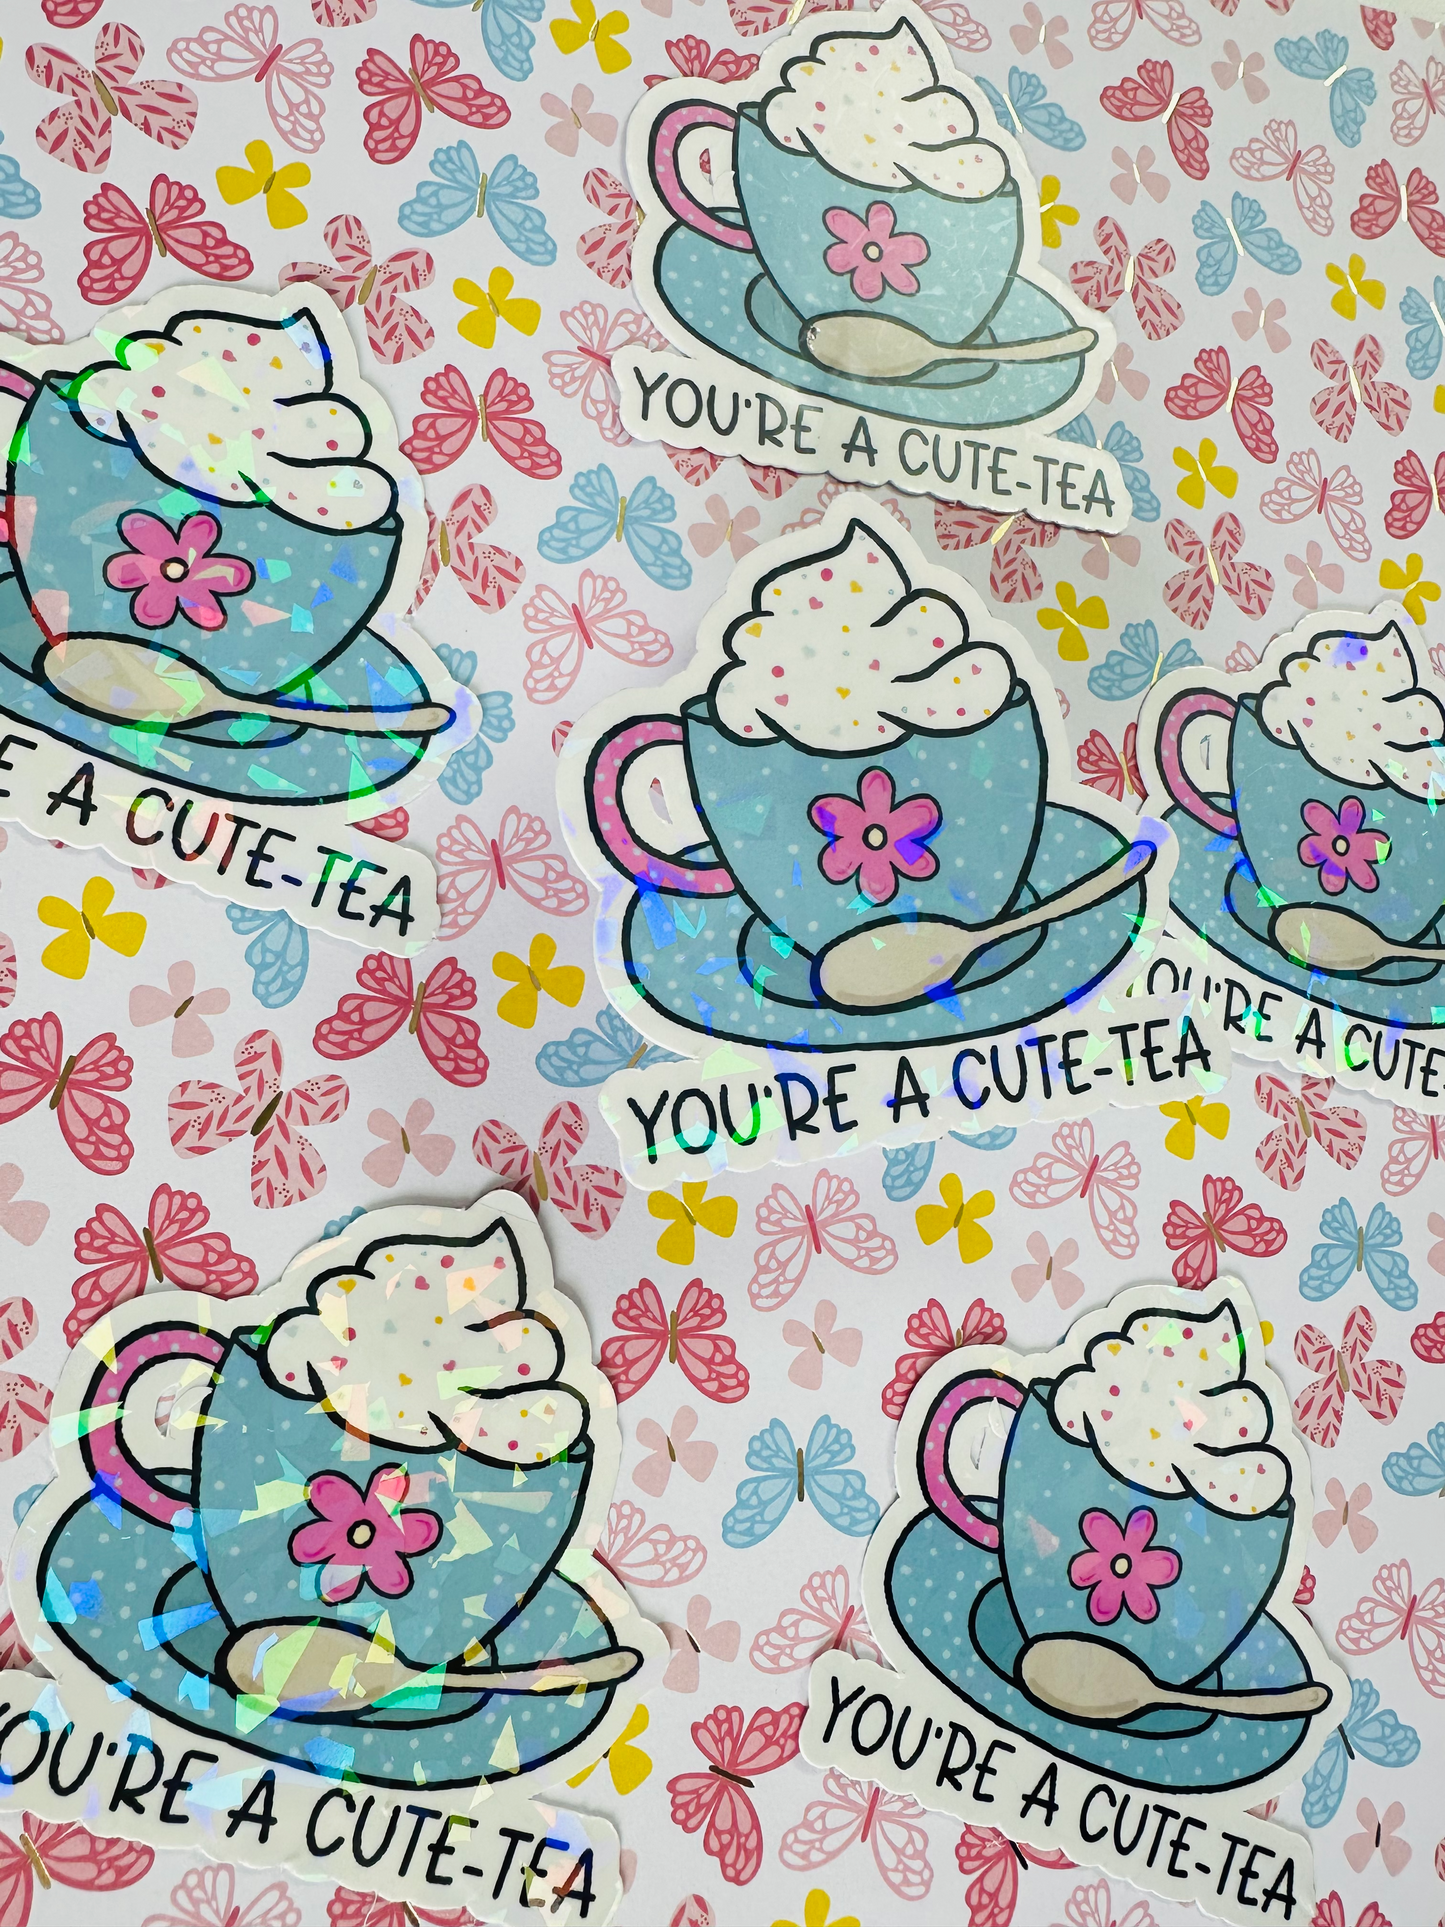 You are a Cute-Tea Holographic Sticker